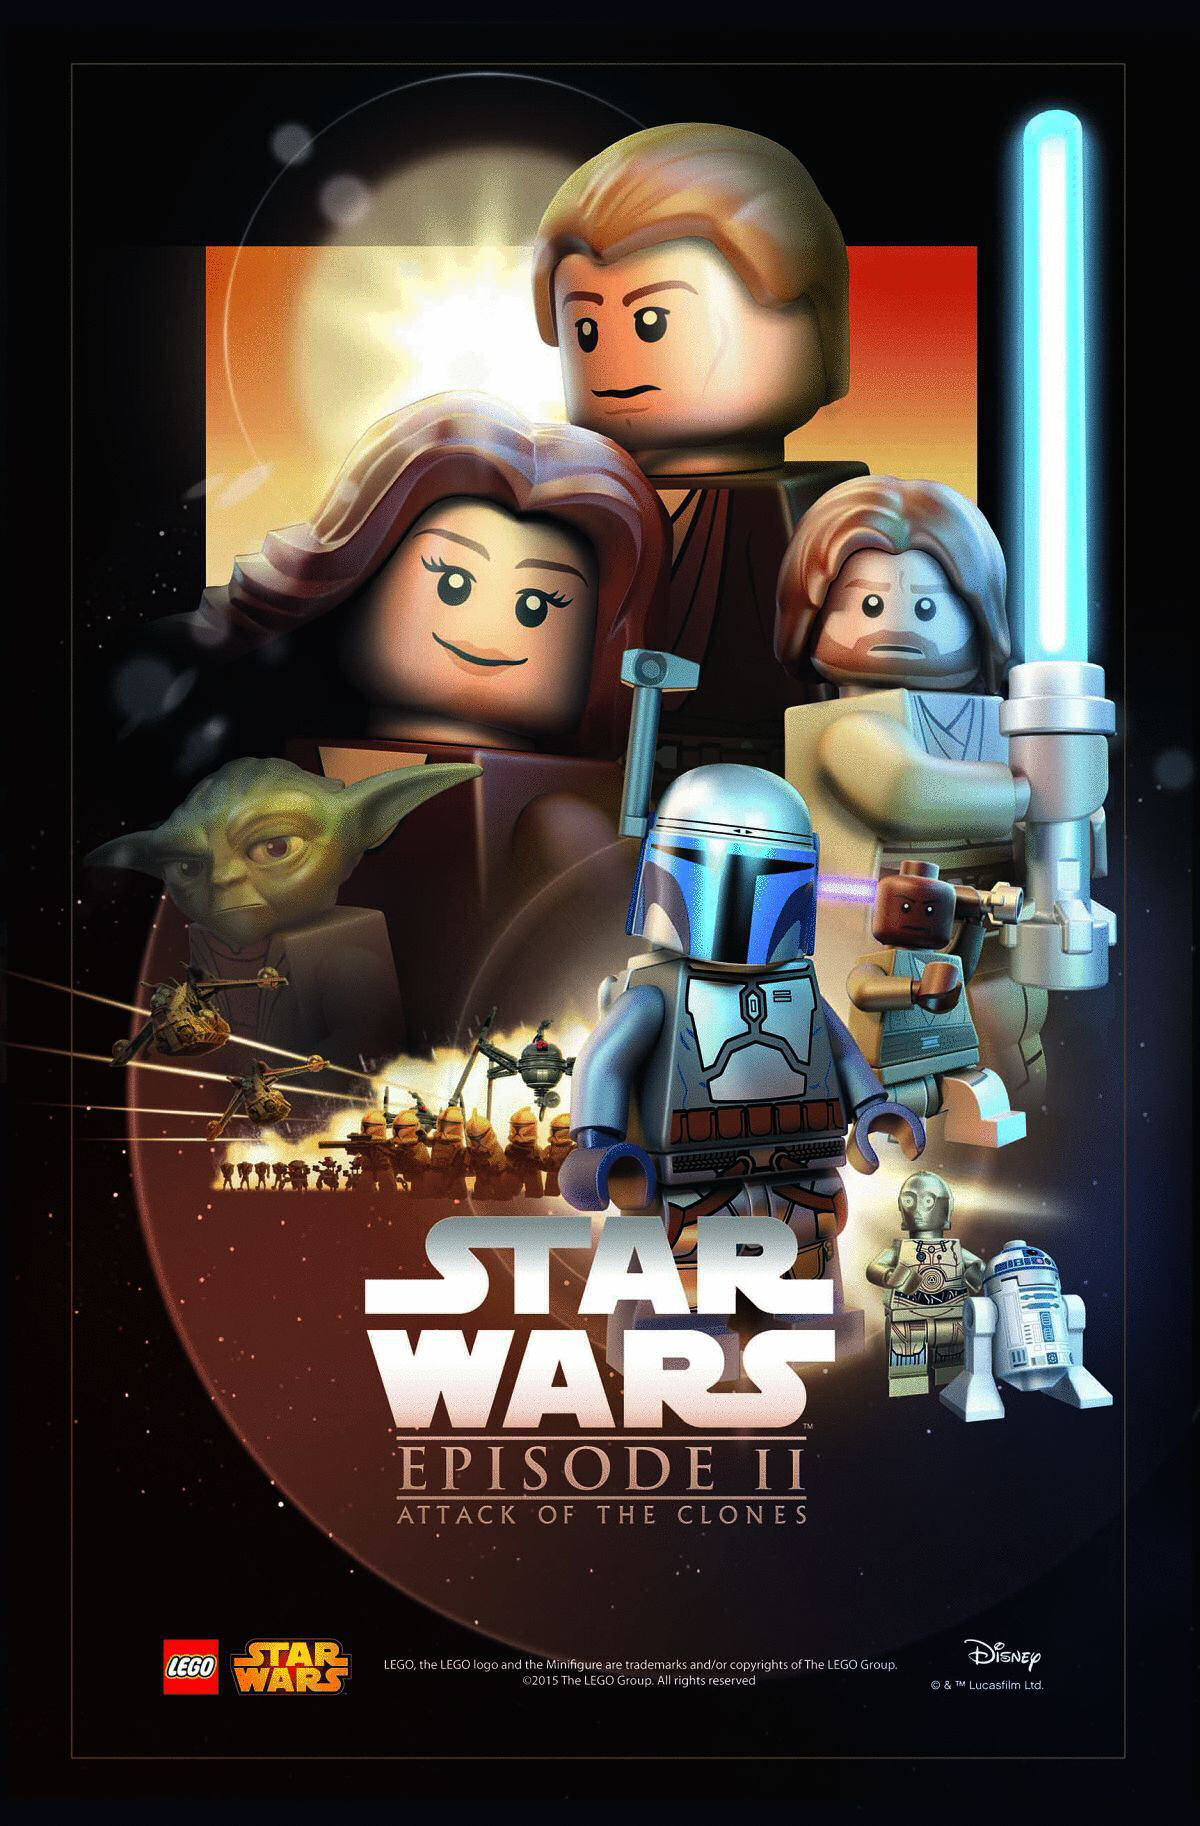 STARS WARS LEGO EPISODE 1 MOVIE POSTER PICTURE PRINT Sizes A5 to A0 **NEW** 